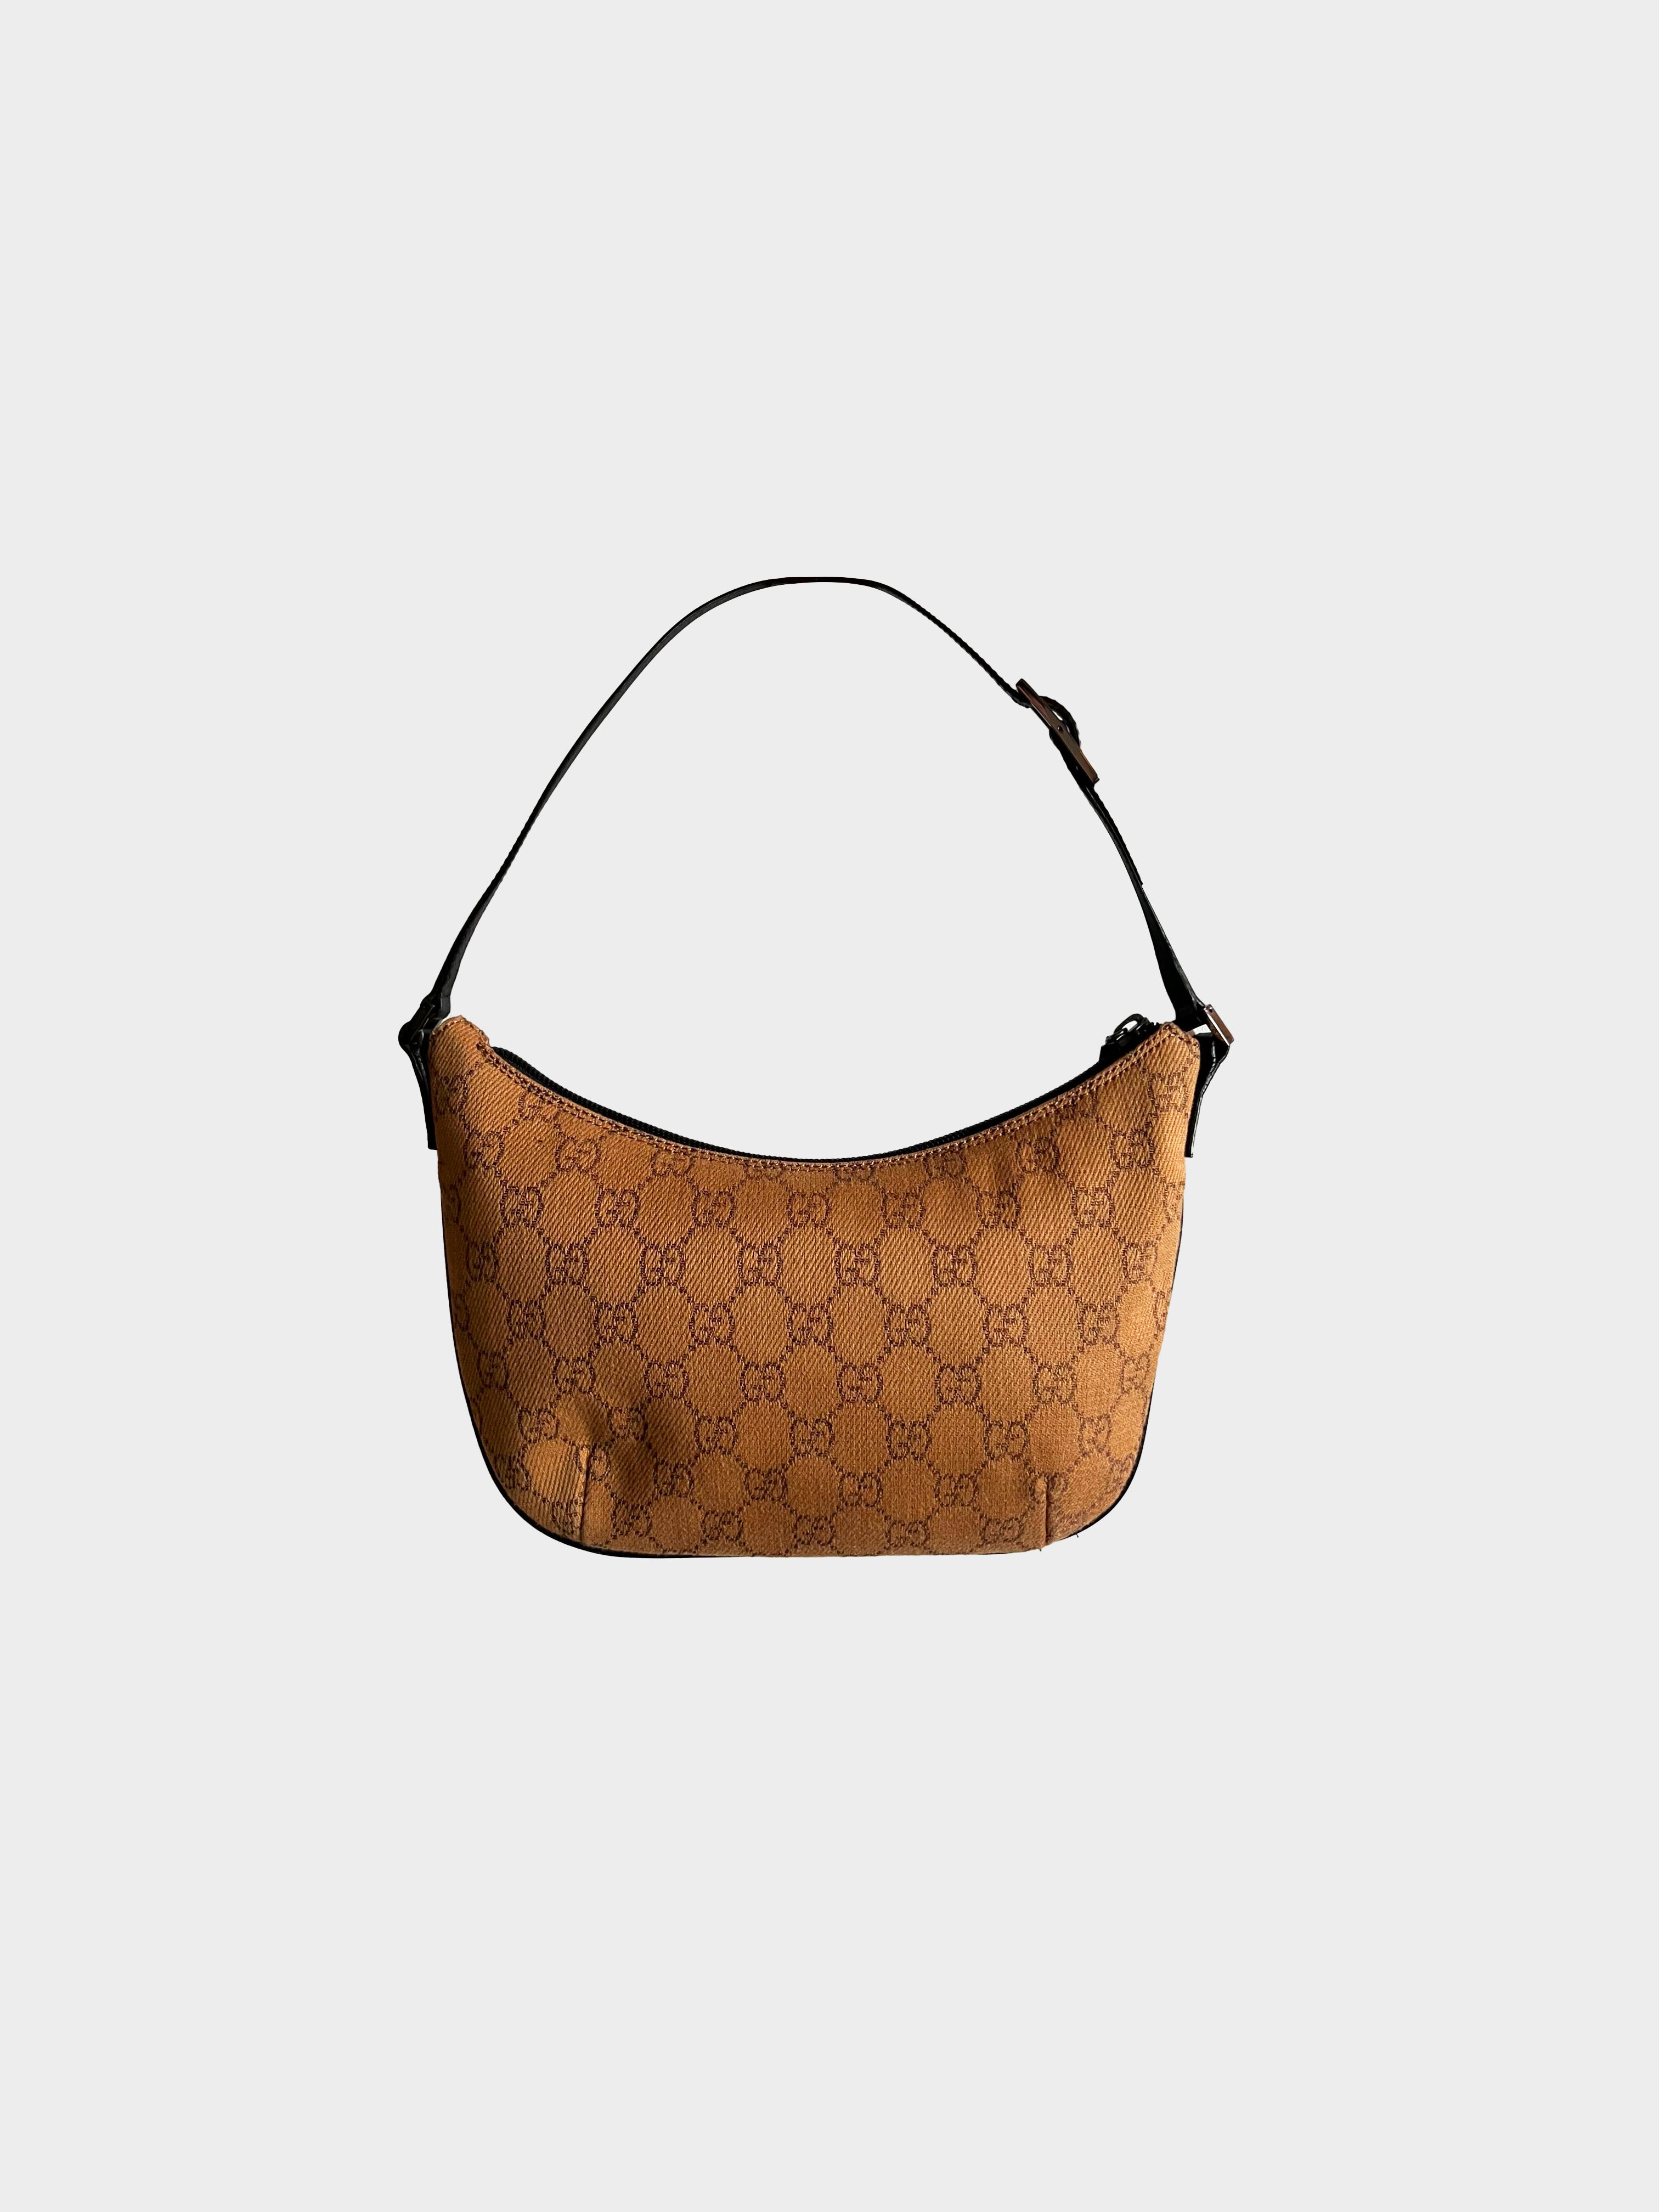 Shop GUCCI Canvas Leather Small Shoulder Bag Logo Outlet by Smartlondon